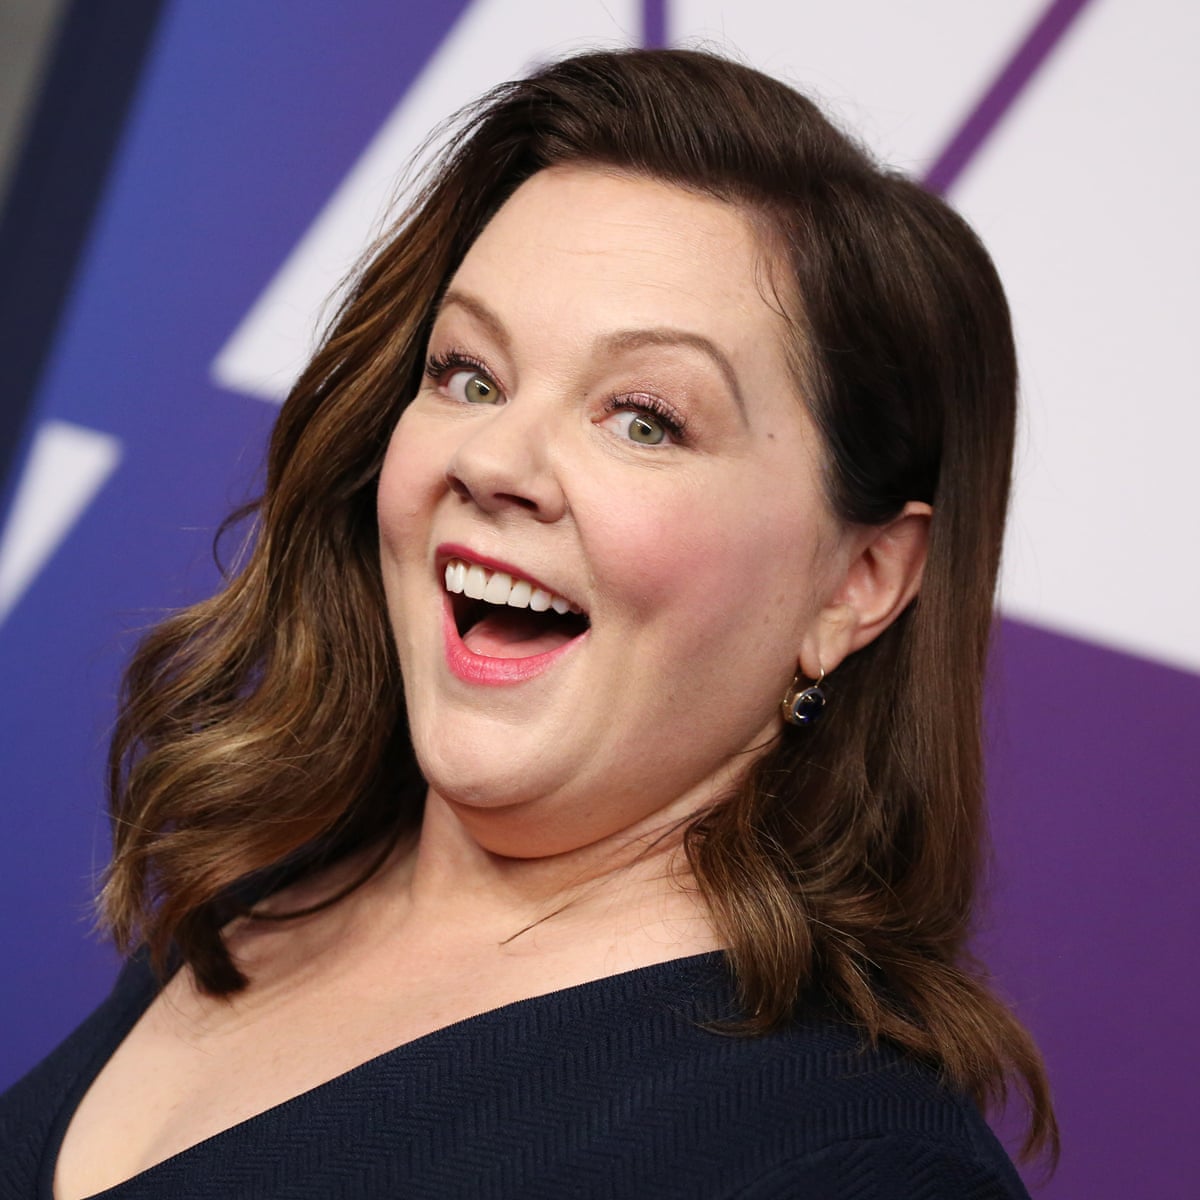 Melissa mccarthy naked pictures